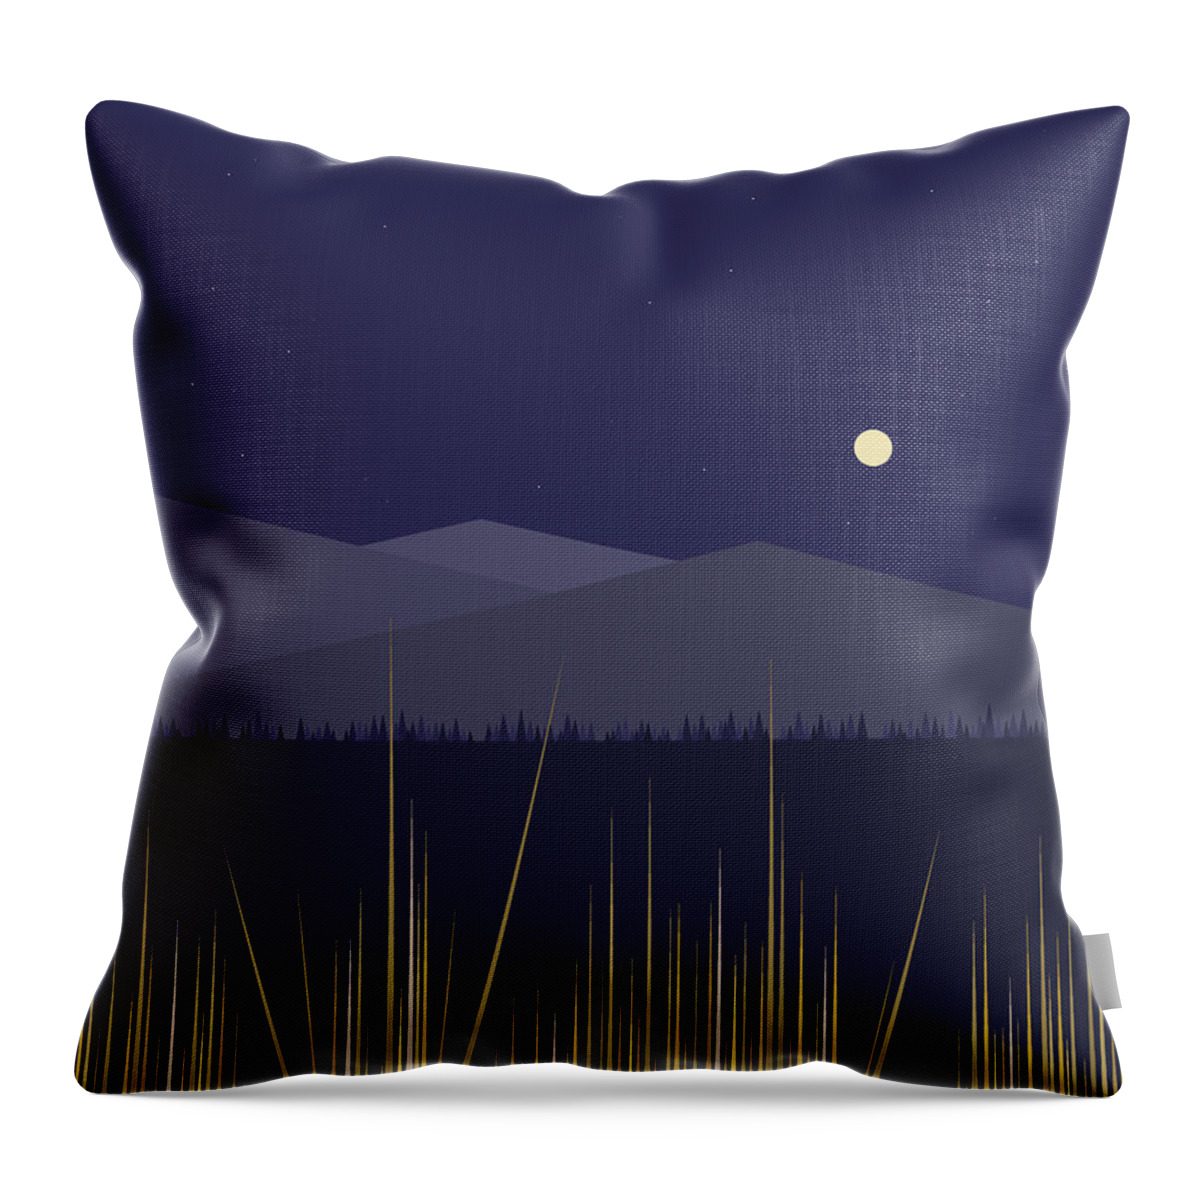 The Full Corn Moon Throw Pillow featuring the digital art The Full Corn Moon by Val Arie